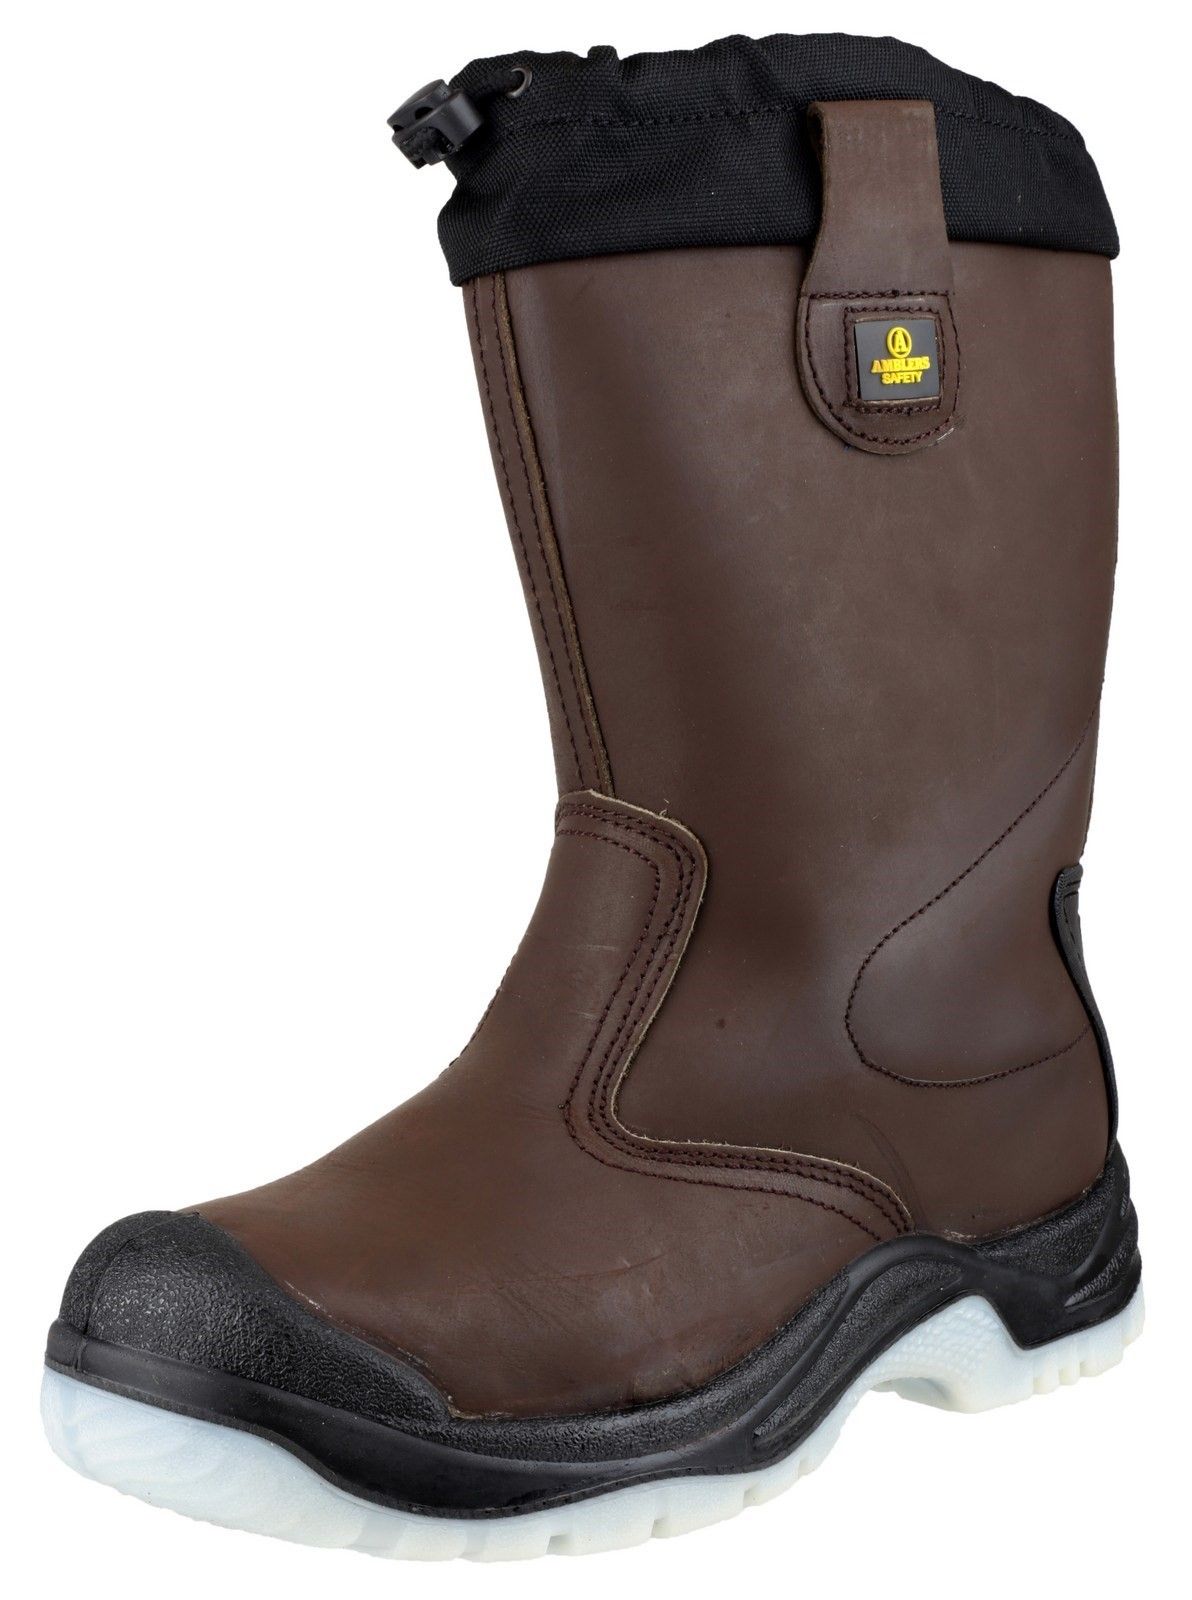 A durable leather safety rigger boot with 200J toe cap, warm lining, antistatic function and penetration protection.Amblers Safety Rigger with Toe Top. 
Conforms to EN ISO 20345:2011 Safety Footwear Standards. 
Mid Calf Water Resistant upper. 
Functional draw-cord and easily adjustable cord-lock. 
Safety boot with steel toe caps for protection.